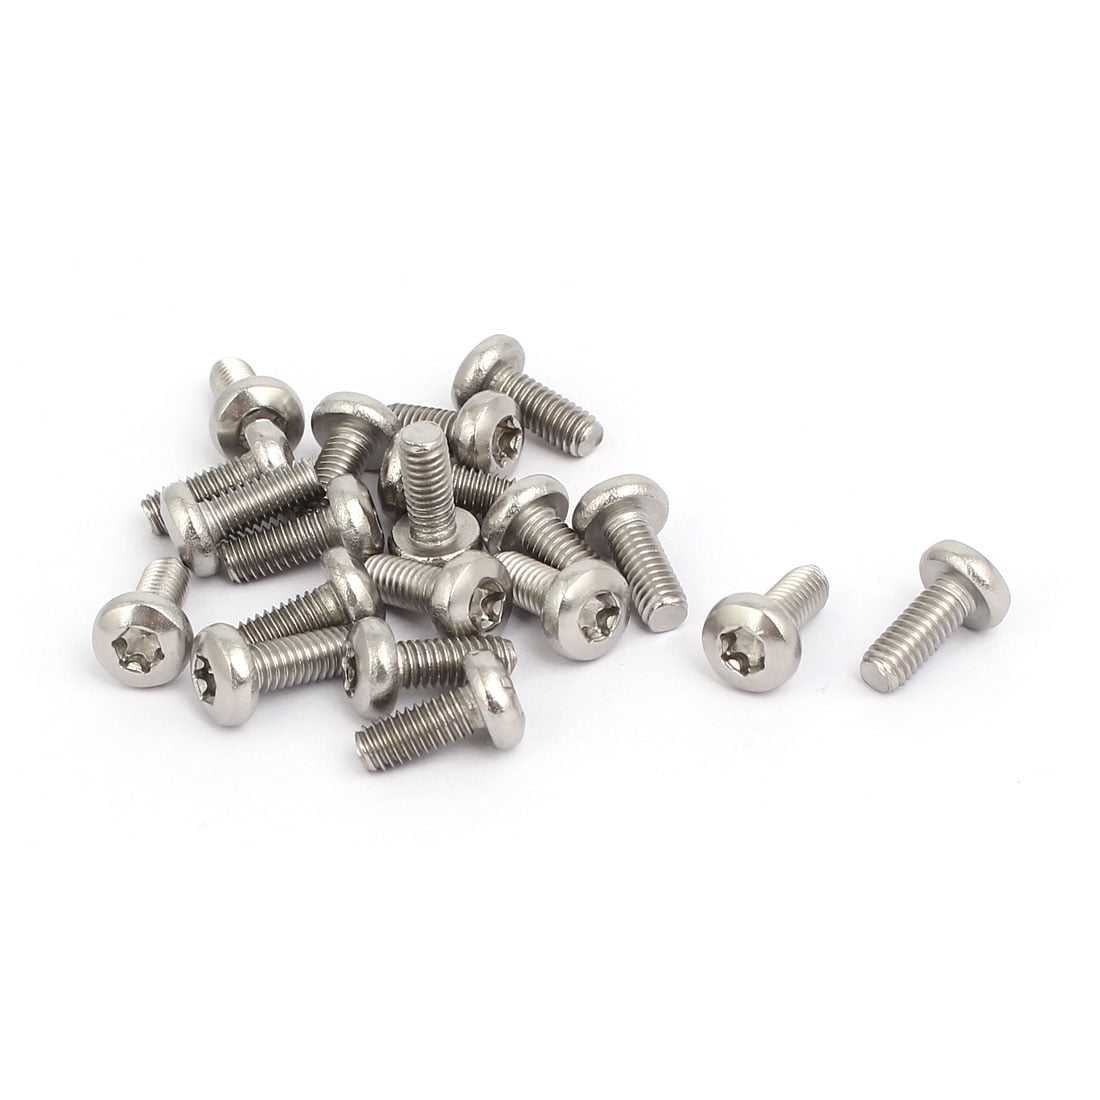 25 @ 4 x 10mm STAINLESS STEEL TORX PIN BUTTON HEAD SELF TAPPING SCREW T20 BIT 